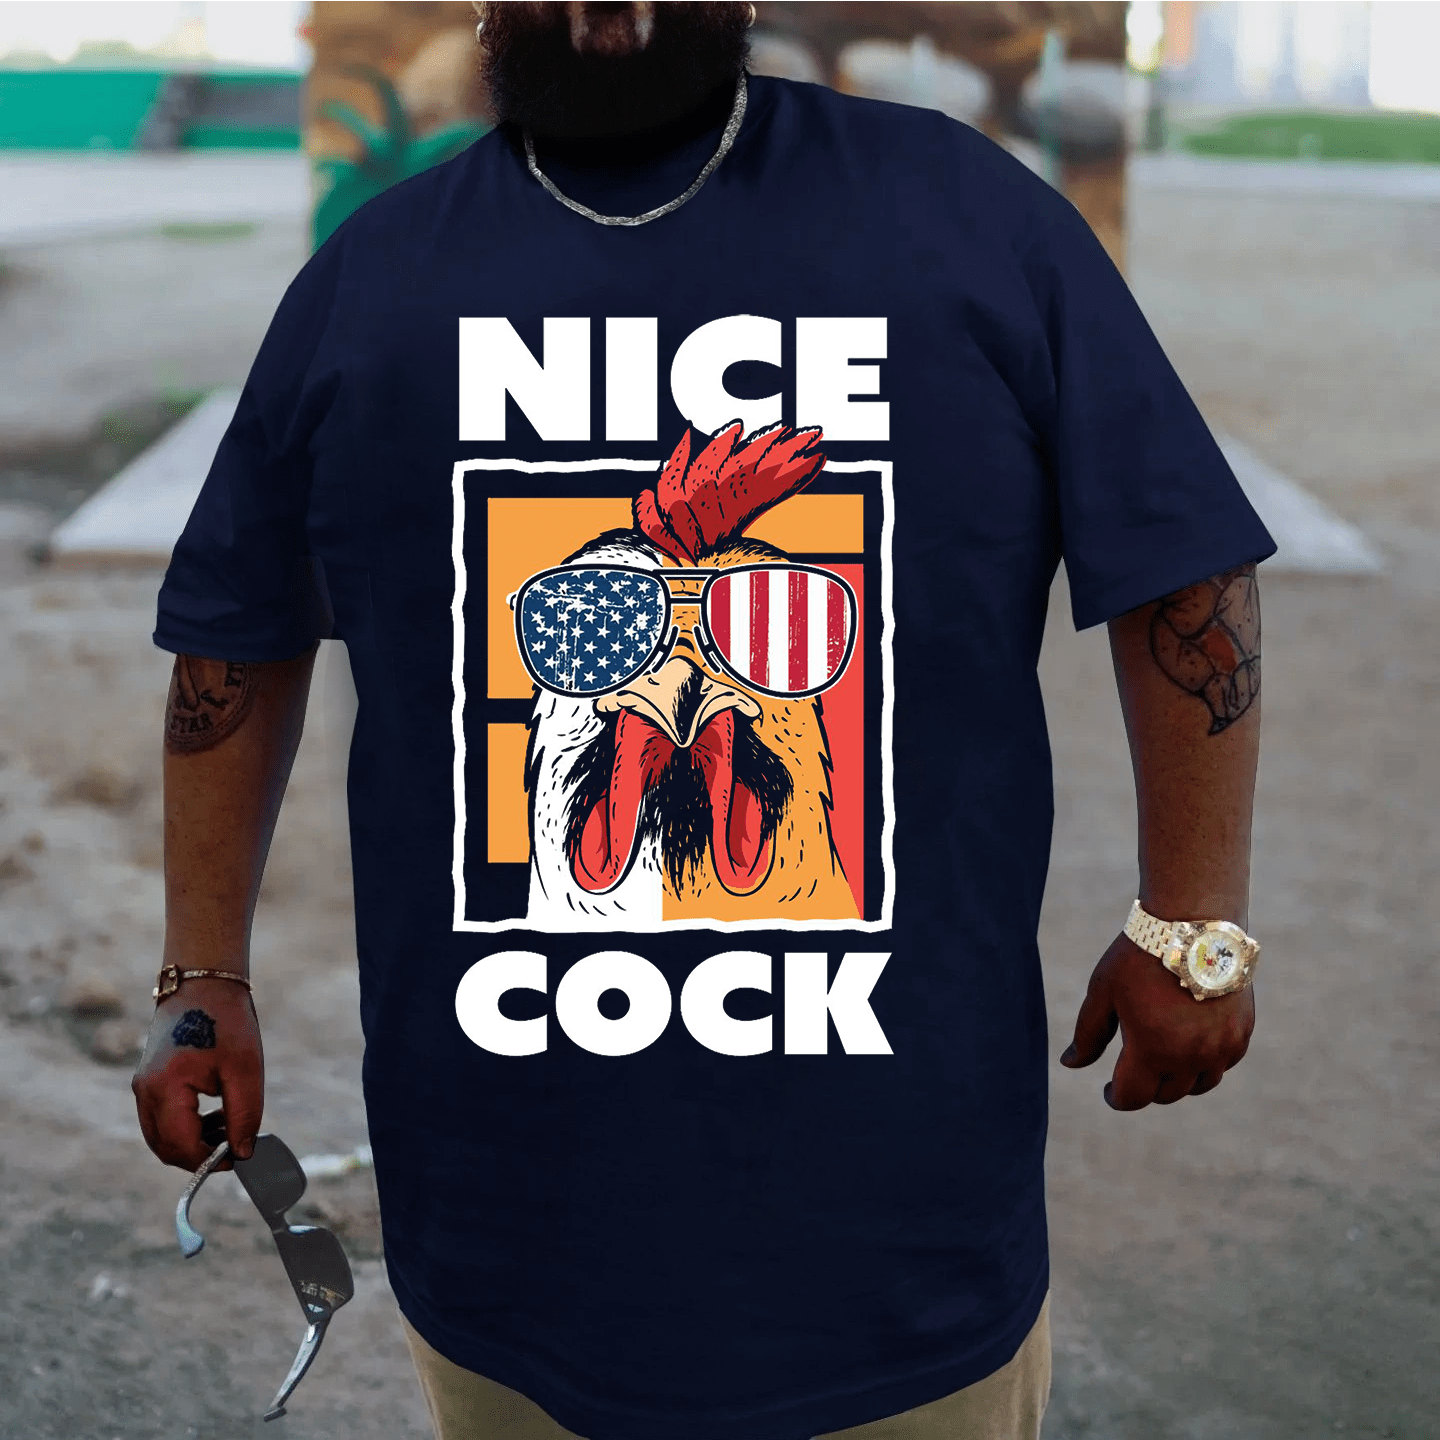 Nick Cock, Funny Men Plus Size Oversize T-shirt for Big & Tall Man